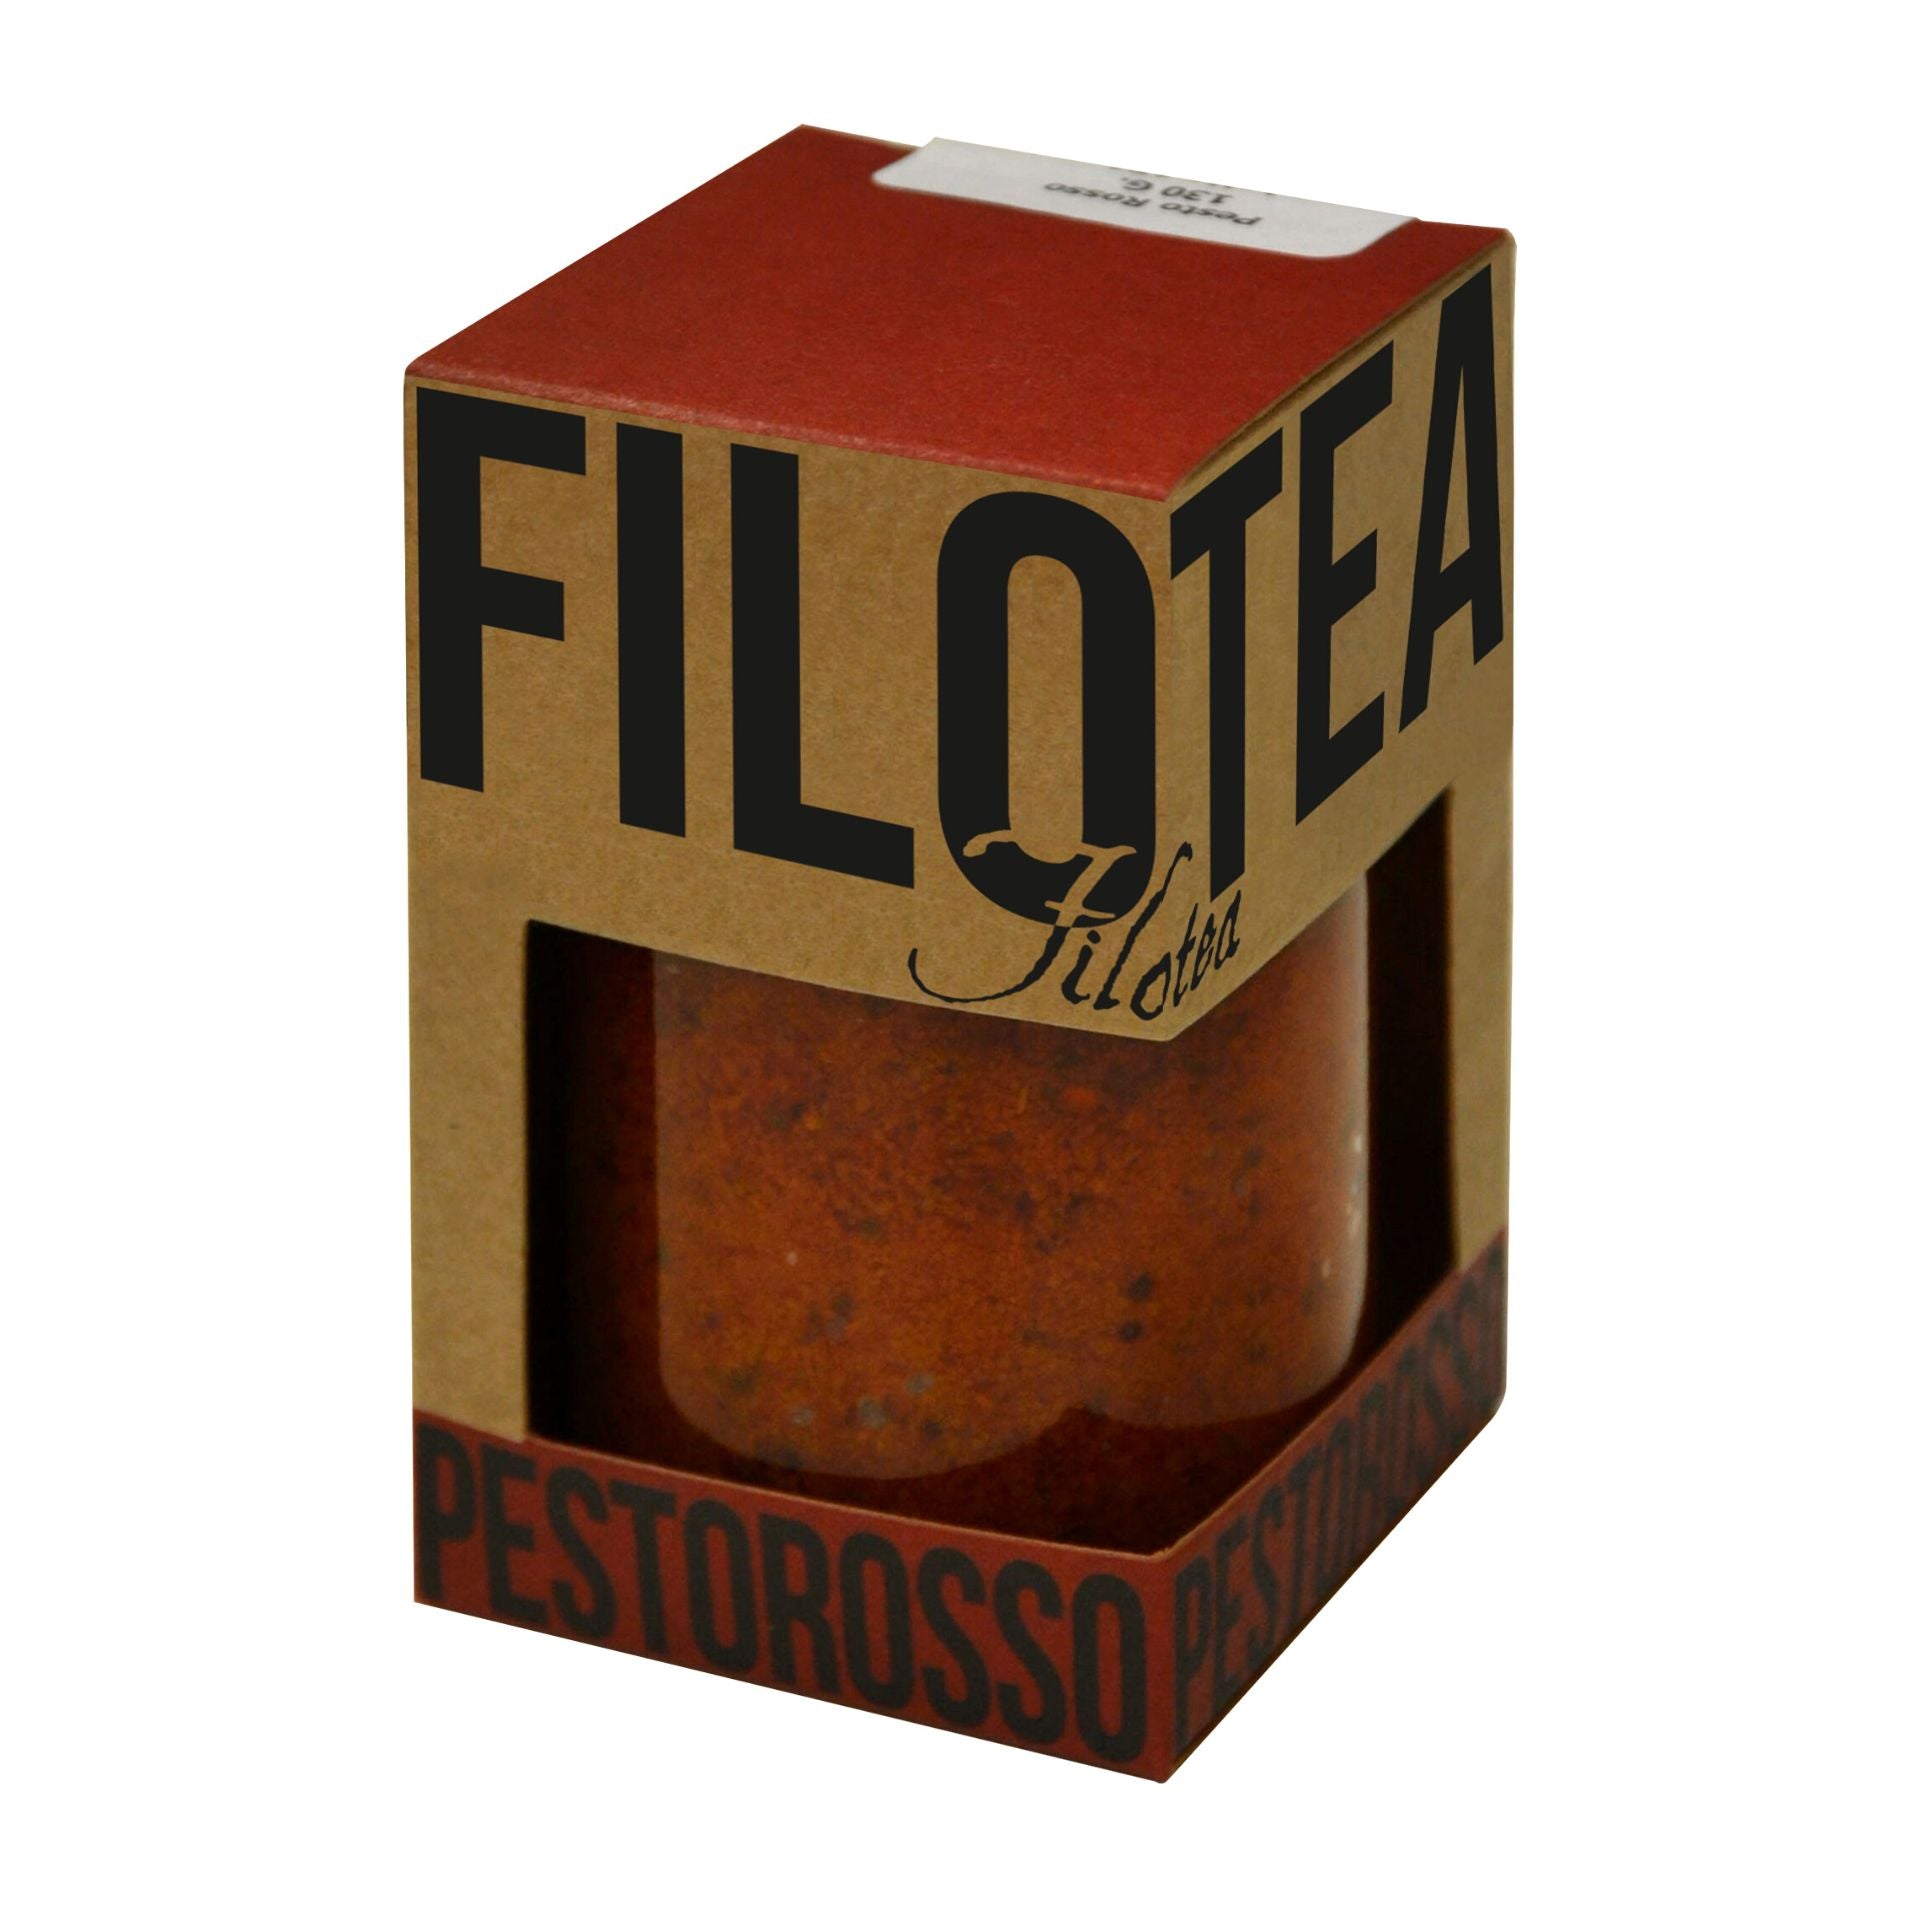 Filotea Red Tomato Pesto 130g  | Imported and distributed in the UK by Just Gourmet Foods